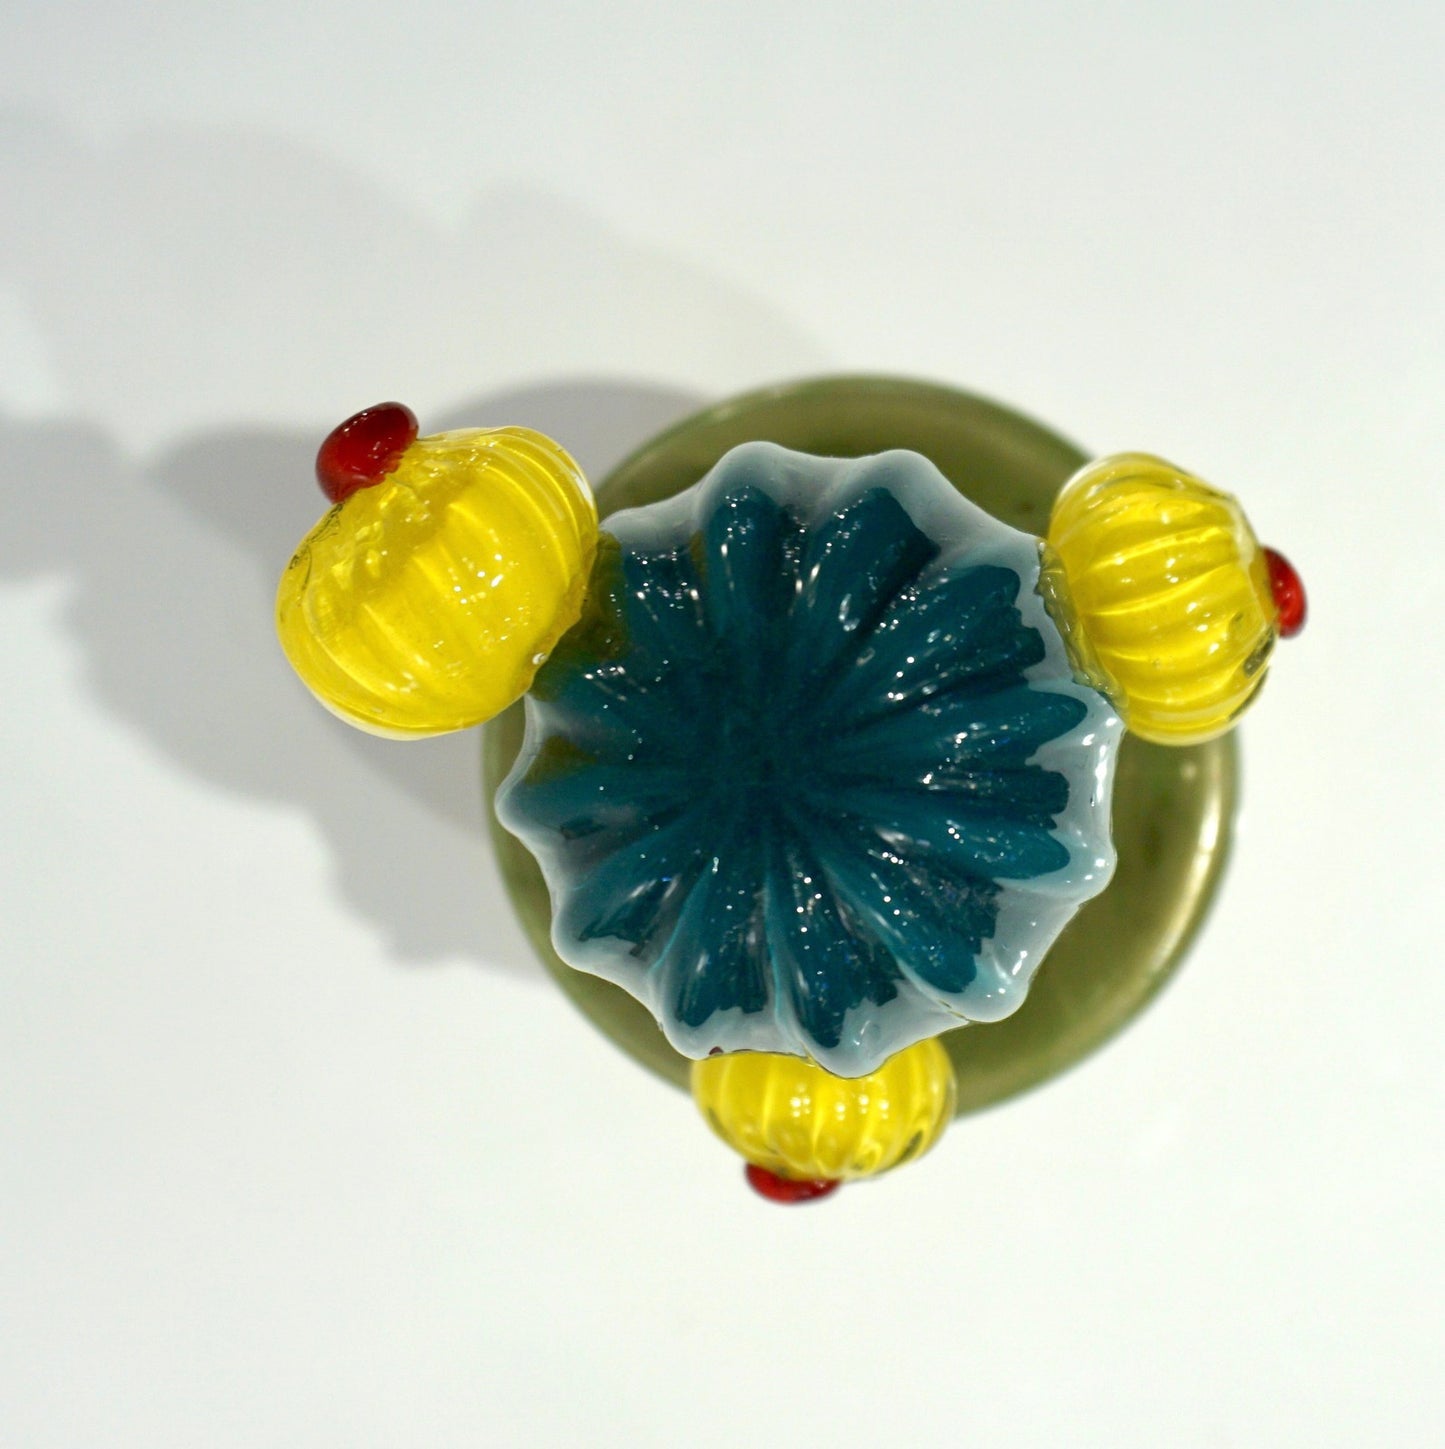 2000s Italian Teal Gold Green Murano Art Glass Cactus Plant with Yellow Flowers